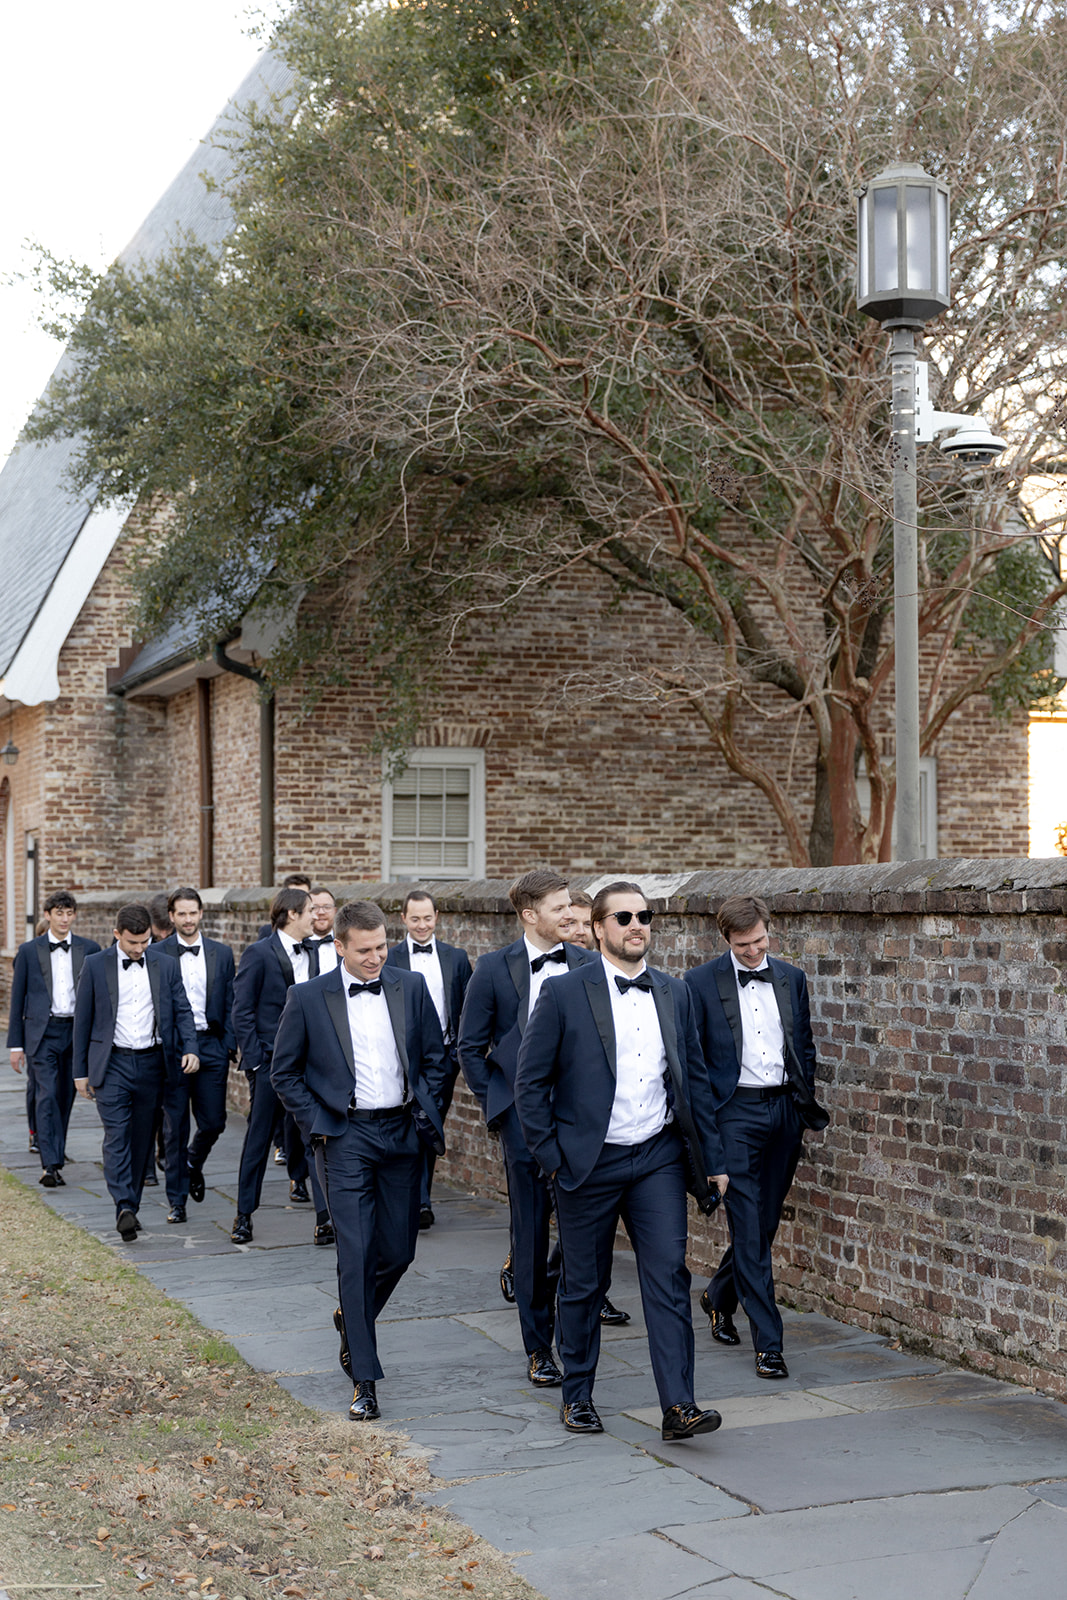 Groom and groomsmen walking along the sidewalk to enter the church